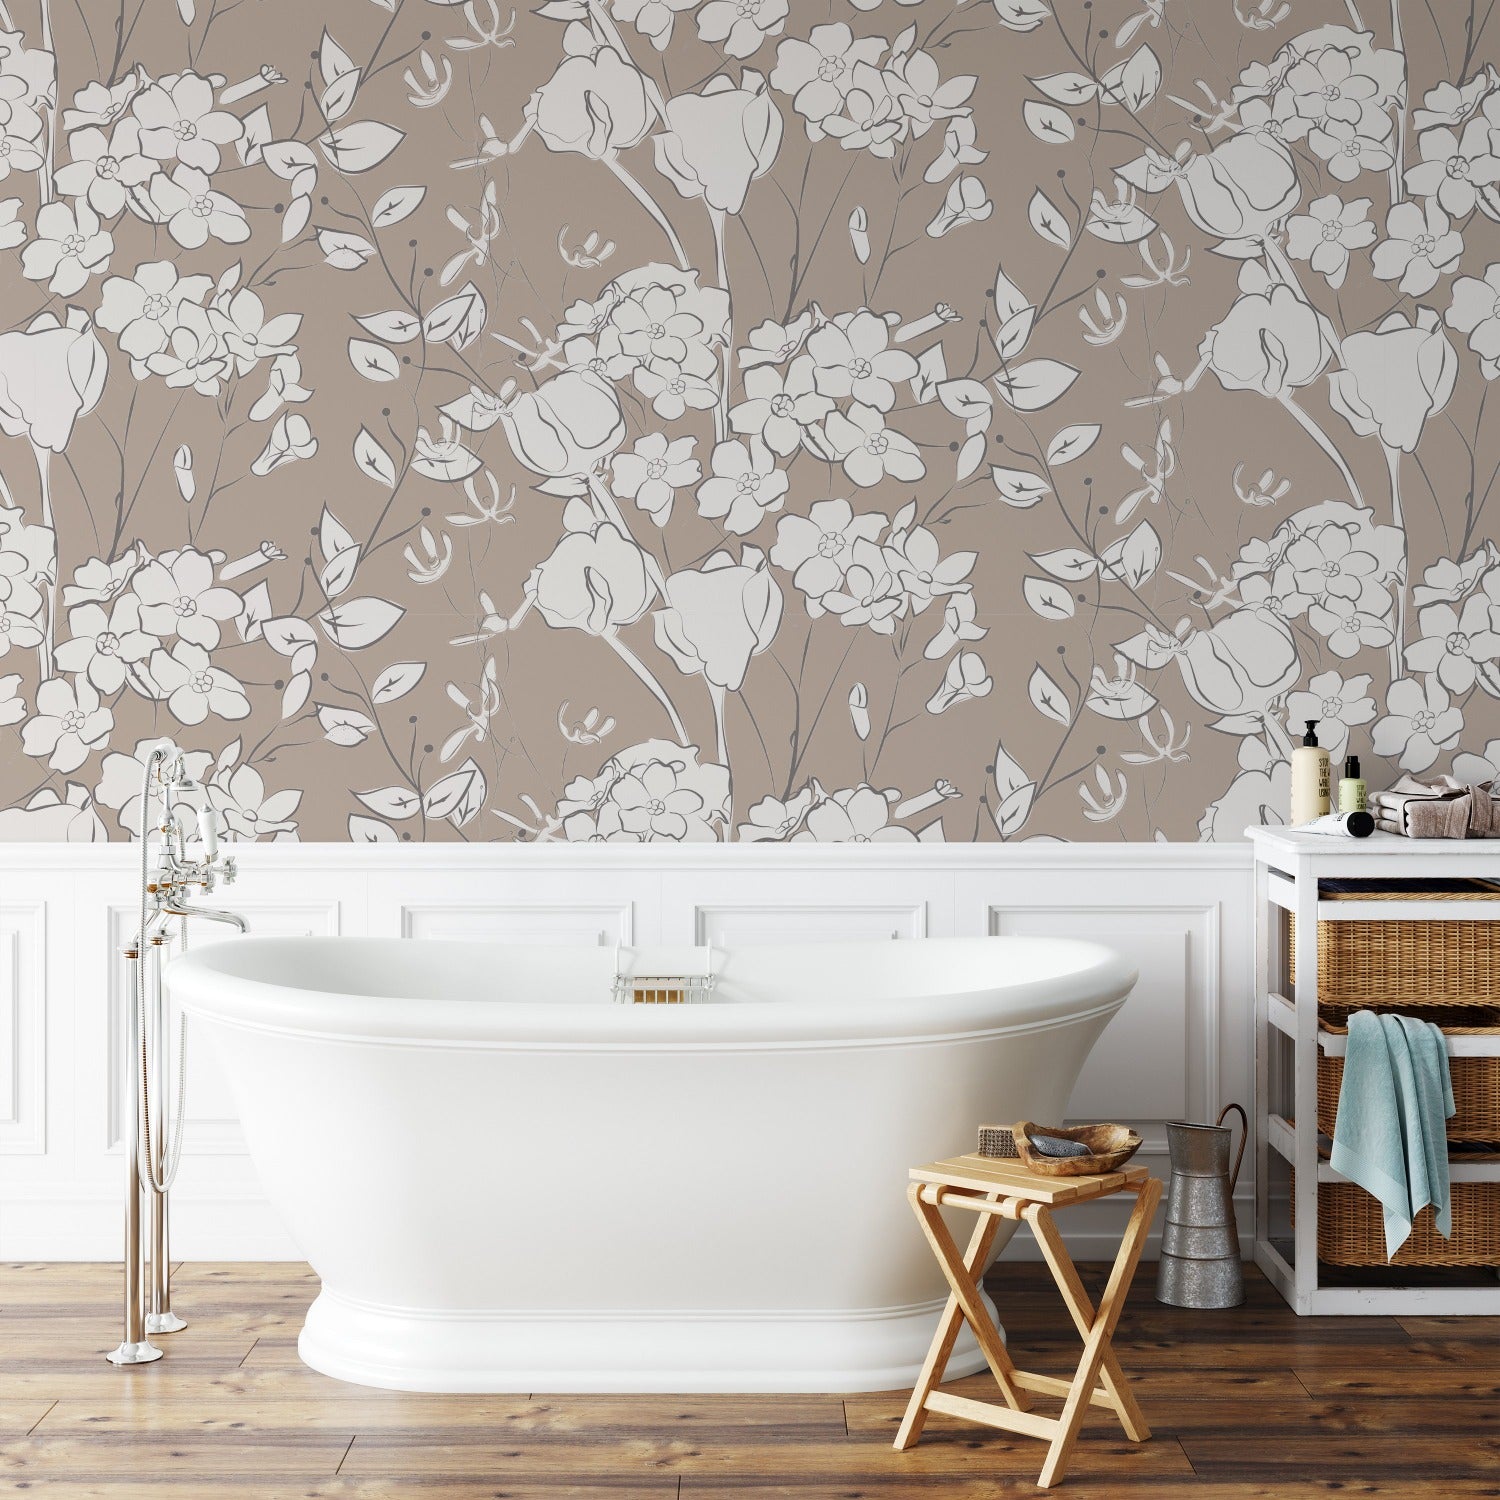 A cozy bathroom corner adorned with the "Floral Line Art Wallpaper," providing a harmonious blend of modern design and natural motifs. The wallpaper brings a lively yet refined element to the space, complementing the bathroom's crisp white fixtures and wooden accents.